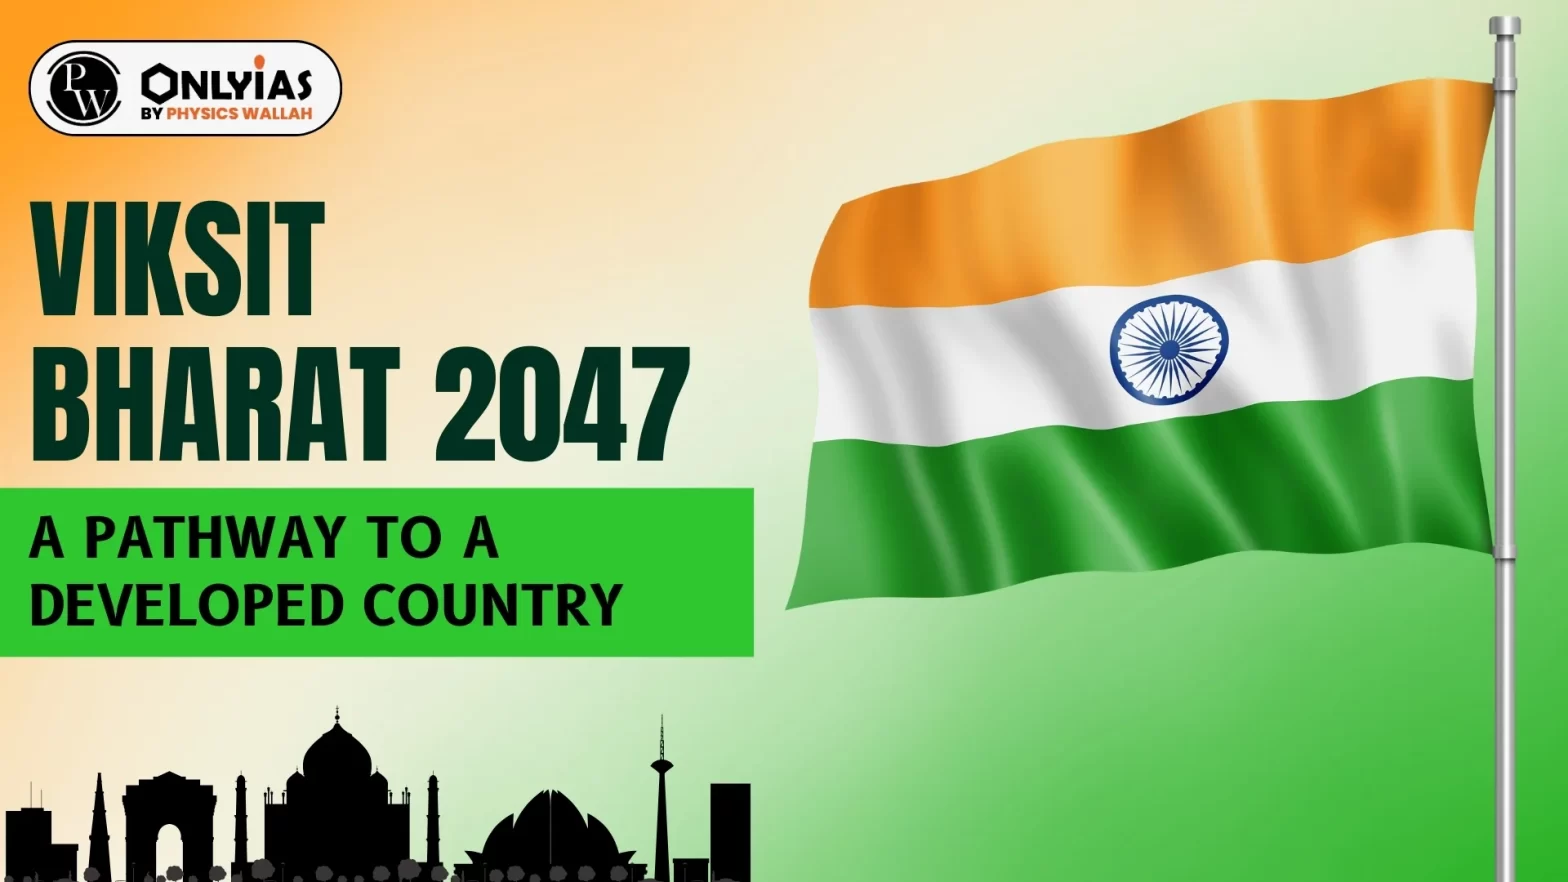 Viksit Bharat 2047: A Pathway to a Developed Country